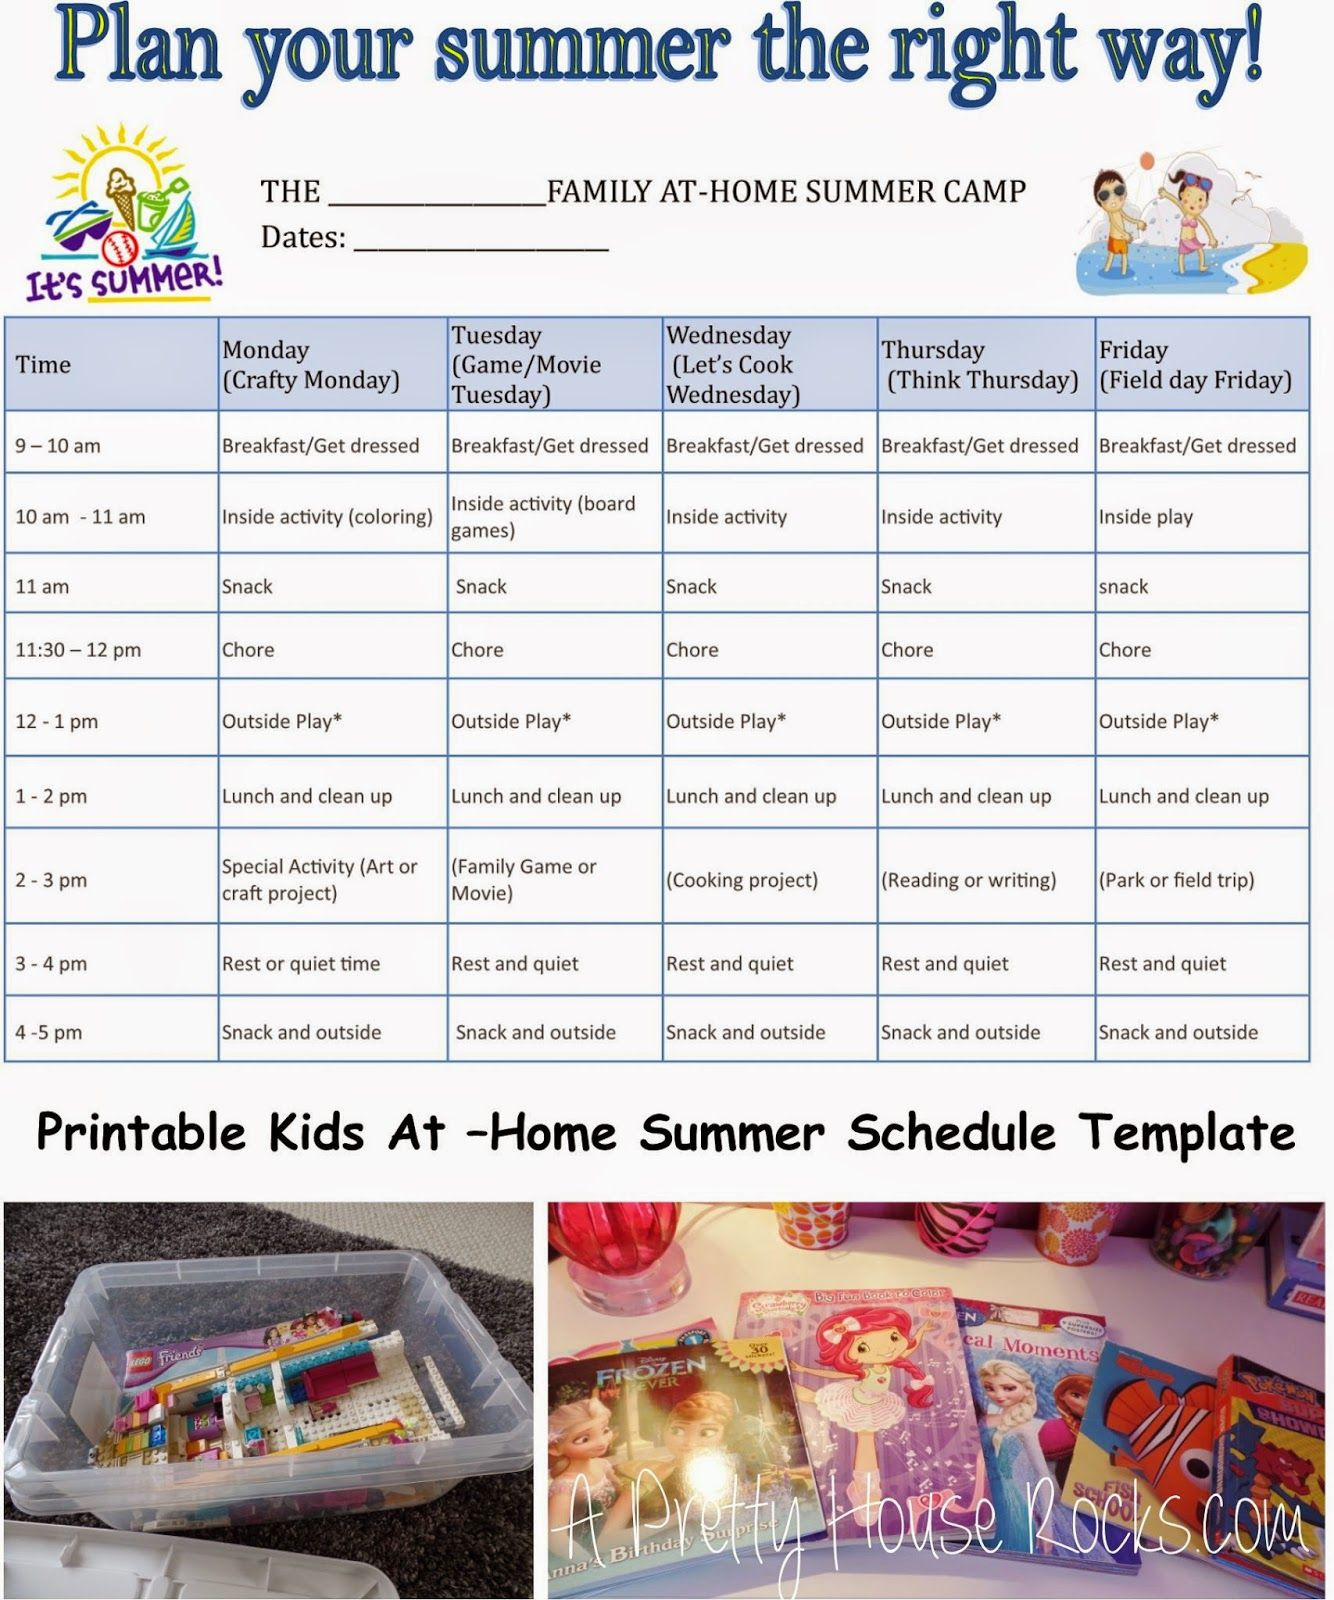 Summer Activities At Home
 At Home summer schedule for kids